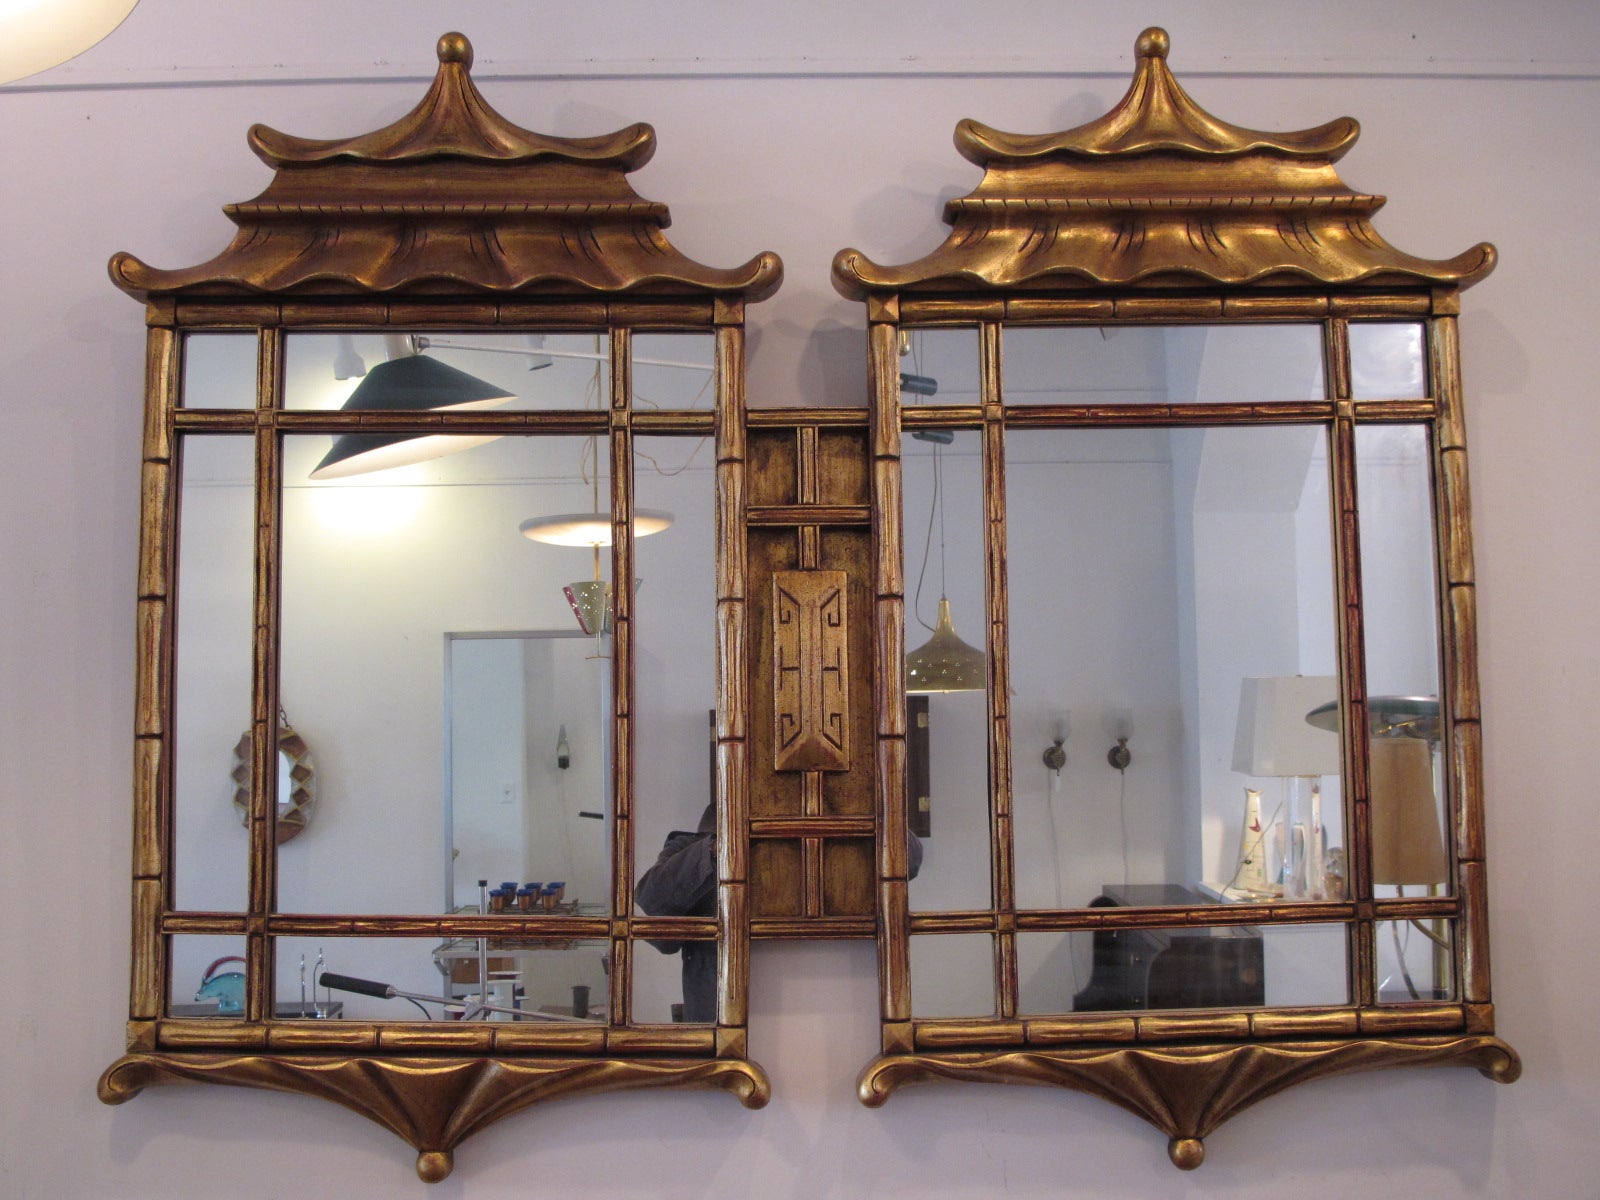 A Large Asian Style Decorative  Mirror